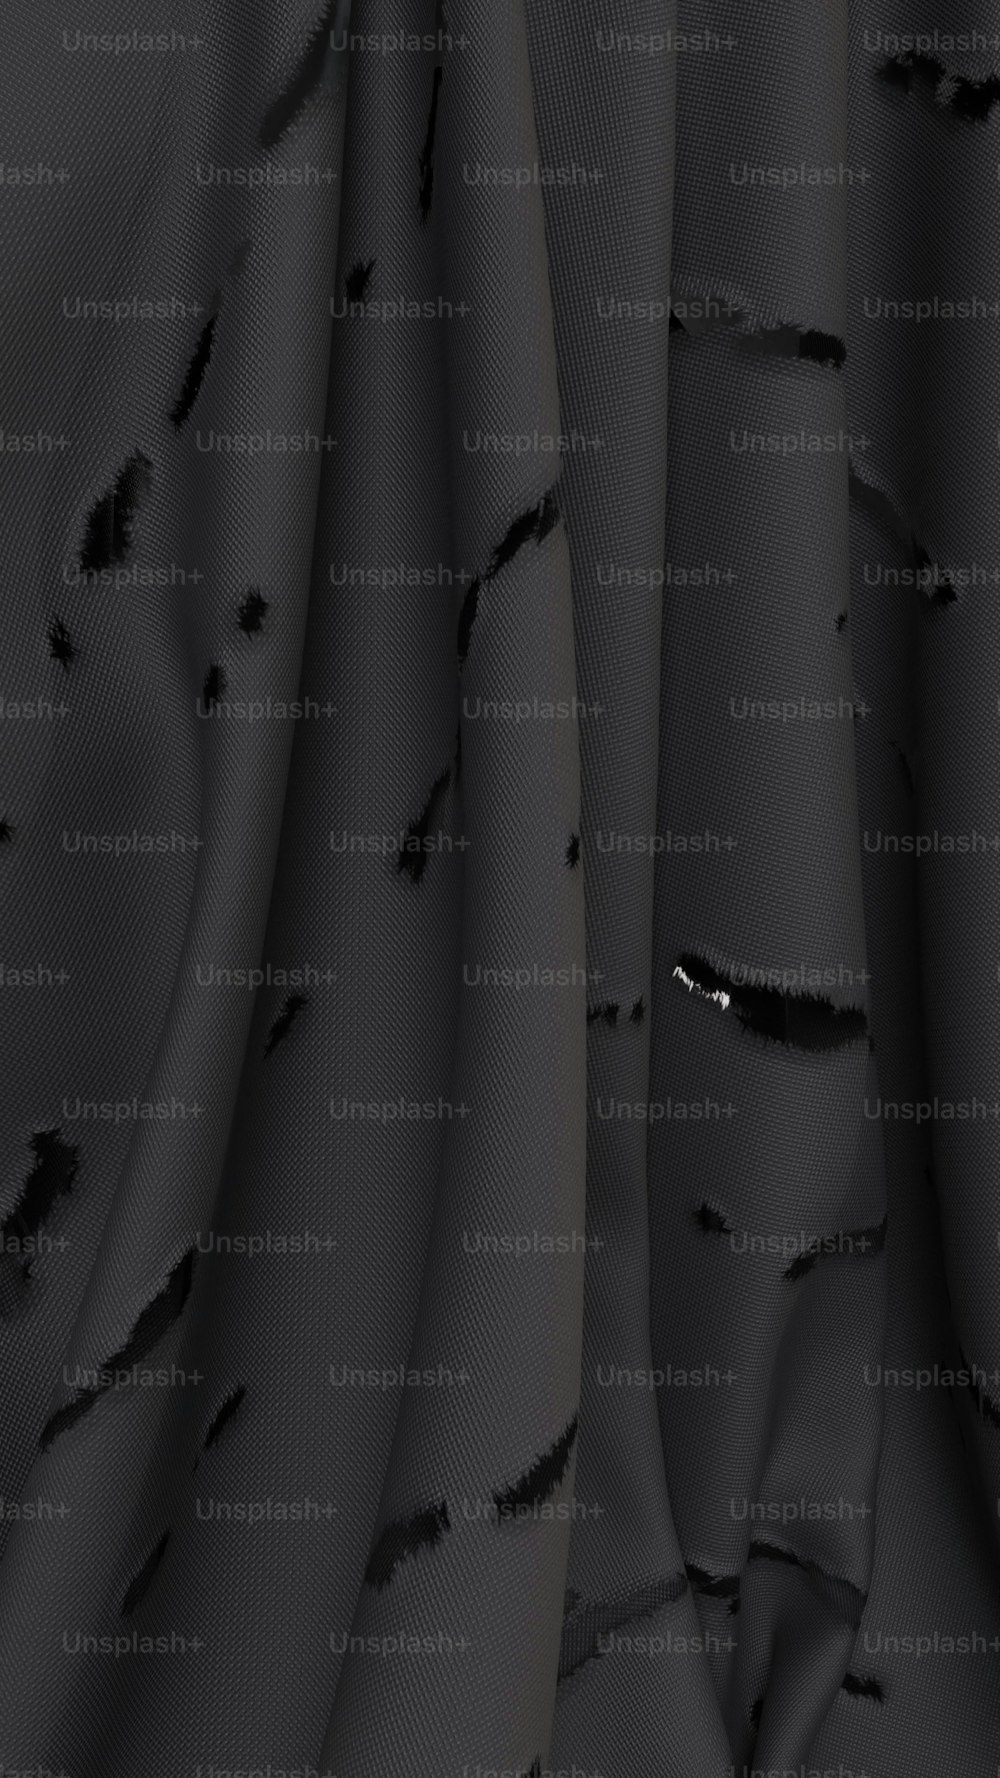 Black Canvas Fabric Texture Picture, Free Photograph